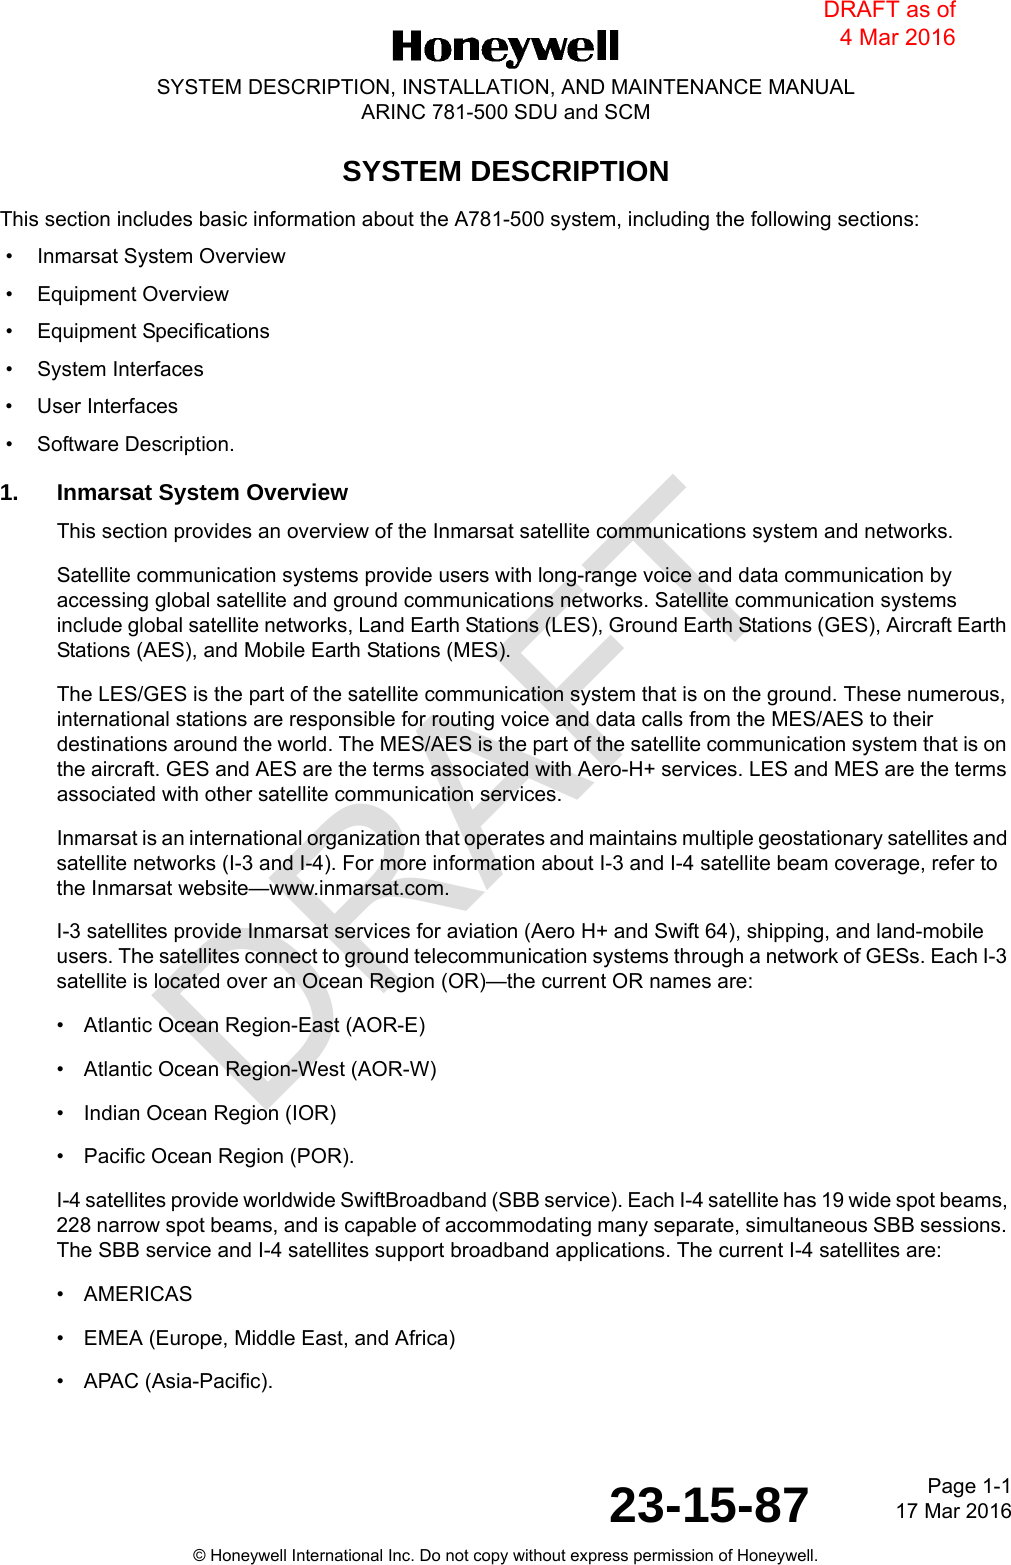 DRAFTPage 1-117 Mar 201623-15-87SYSTEM DESCRIPTION, INSTALLATION, AND MAINTENANCE MANUALARINC 781-500 SDU and SCM© Honeywell International Inc. Do not copy without express permission of Honeywell.SYSTEM DESCRIPTIONThis section includes basic information about the A781-500 system, including the following sections: • Inmarsat System Overview • Equipment Overview • Equipment Specifications • System Interfaces • User Interfaces • Software Description.1. Inmarsat System OverviewThis section provides an overview of the Inmarsat satellite communications system and networks.Satellite communication systems provide users with long-range voice and data communication by accessing global satellite and ground communications networks. Satellite communication systems include global satellite networks, Land Earth Stations (LES), Ground Earth Stations (GES), Aircraft Earth Stations (AES), and Mobile Earth Stations (MES).The LES/GES is the part of the satellite communication system that is on the ground. These numerous, international stations are responsible for routing voice and data calls from the MES/AES to their destinations around the world. The MES/AES is the part of the satellite communication system that is on the aircraft. GES and AES are the terms associated with Aero-H+ services. LES and MES are the terms associated with other satellite communication services.Inmarsat is an international organization that operates and maintains multiple geostationary satellites and satellite networks (I-3 and I-4). For more information about I-3 and I-4 satellite beam coverage, refer to the Inmarsat website—www.inmarsat.com.I-3 satellites provide Inmarsat services for aviation (Aero H+ and Swift 64), shipping, and land-mobile users. The satellites connect to ground telecommunication systems through a network of GESs. Each I-3 satellite is located over an Ocean Region (OR)—the current OR names are:• Atlantic Ocean Region-East (AOR-E)• Atlantic Ocean Region-West (AOR-W)• Indian Ocean Region (IOR)• Pacific Ocean Region (POR).I-4 satellites provide worldwide SwiftBroadband (SBB service). Each I-4 satellite has 19 wide spot beams, 228 narrow spot beams, and is capable of accommodating many separate, simultaneous SBB sessions. The SBB service and I-4 satellites support broadband applications. The current I-4 satellites are:• AMERICAS• EMEA (Europe, Middle East, and Africa)• APAC (Asia-Pacific).DRAFT as of 4 Mar 2016